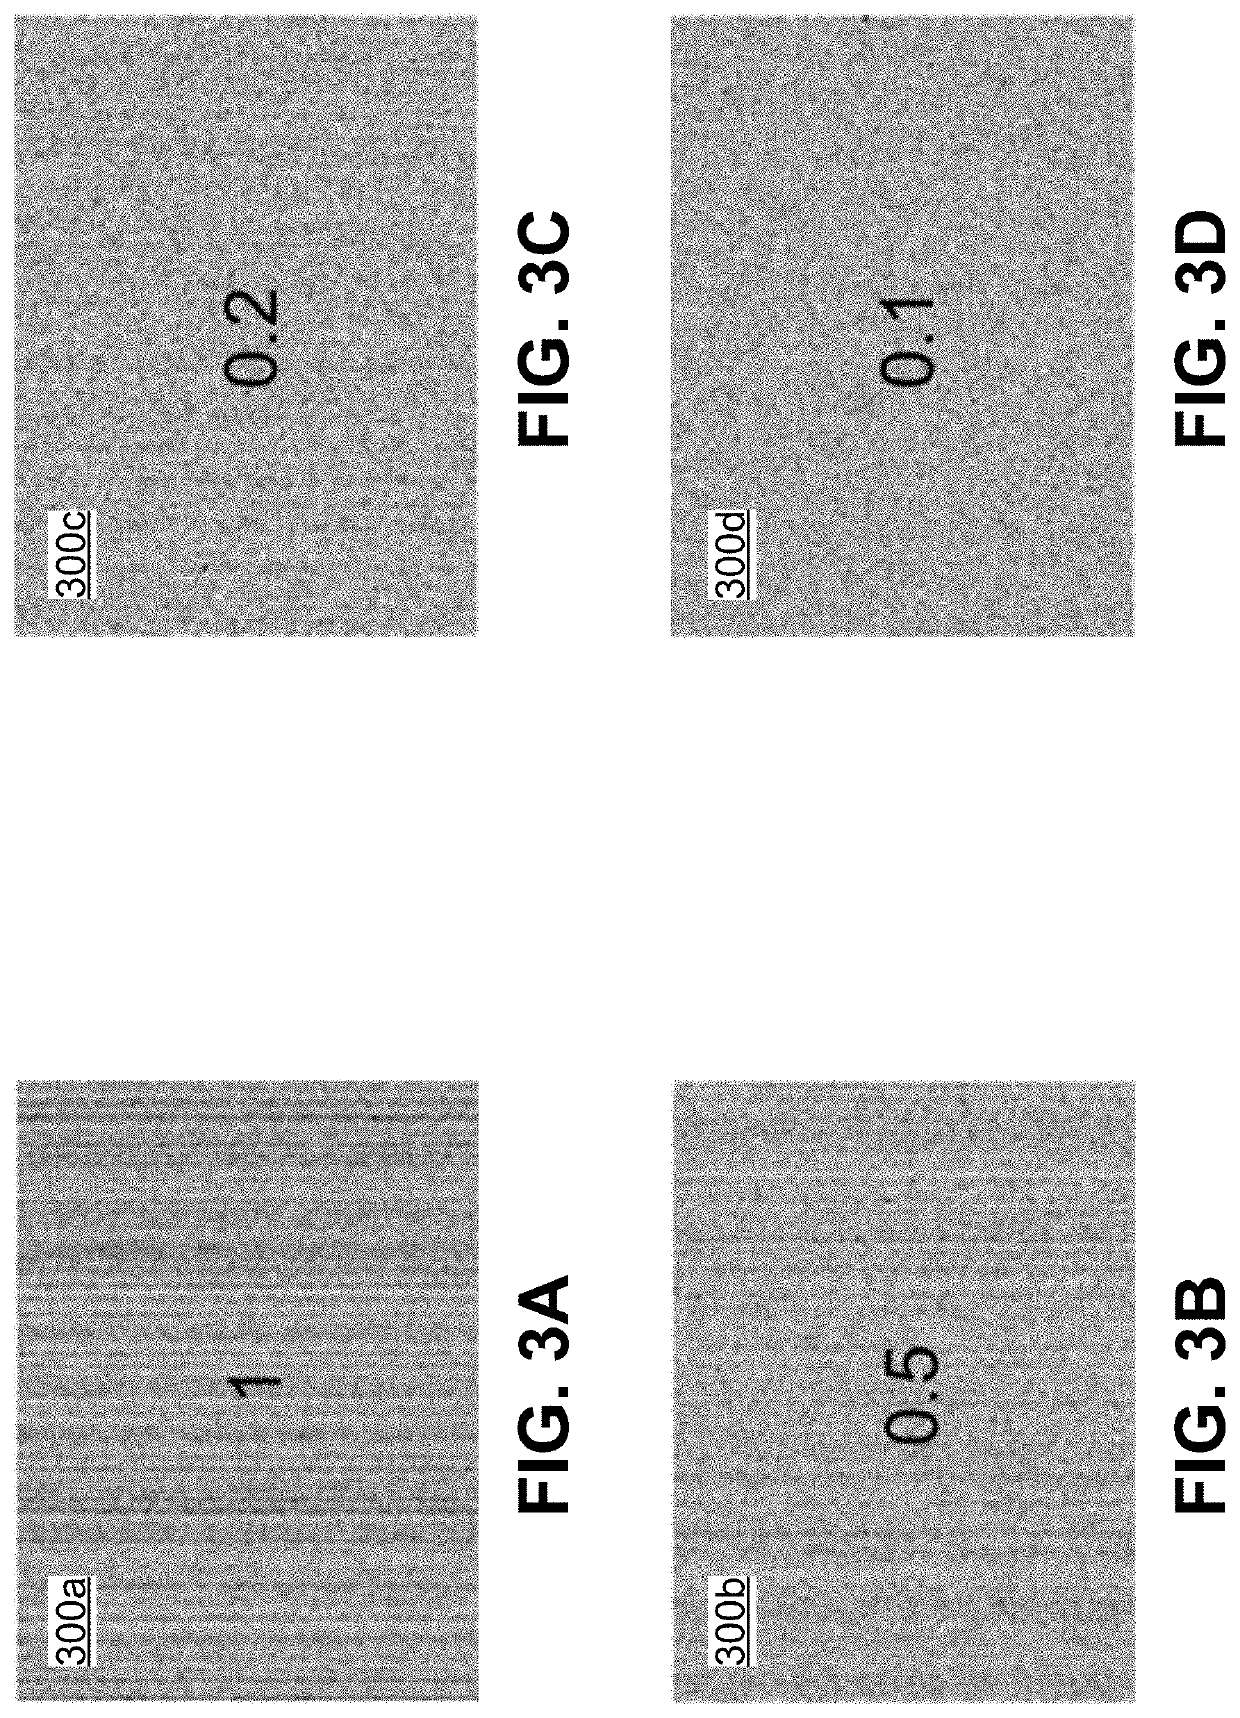 Reduction of fixed-pattern noise in digital image sensors by mitigating gain mismatch error